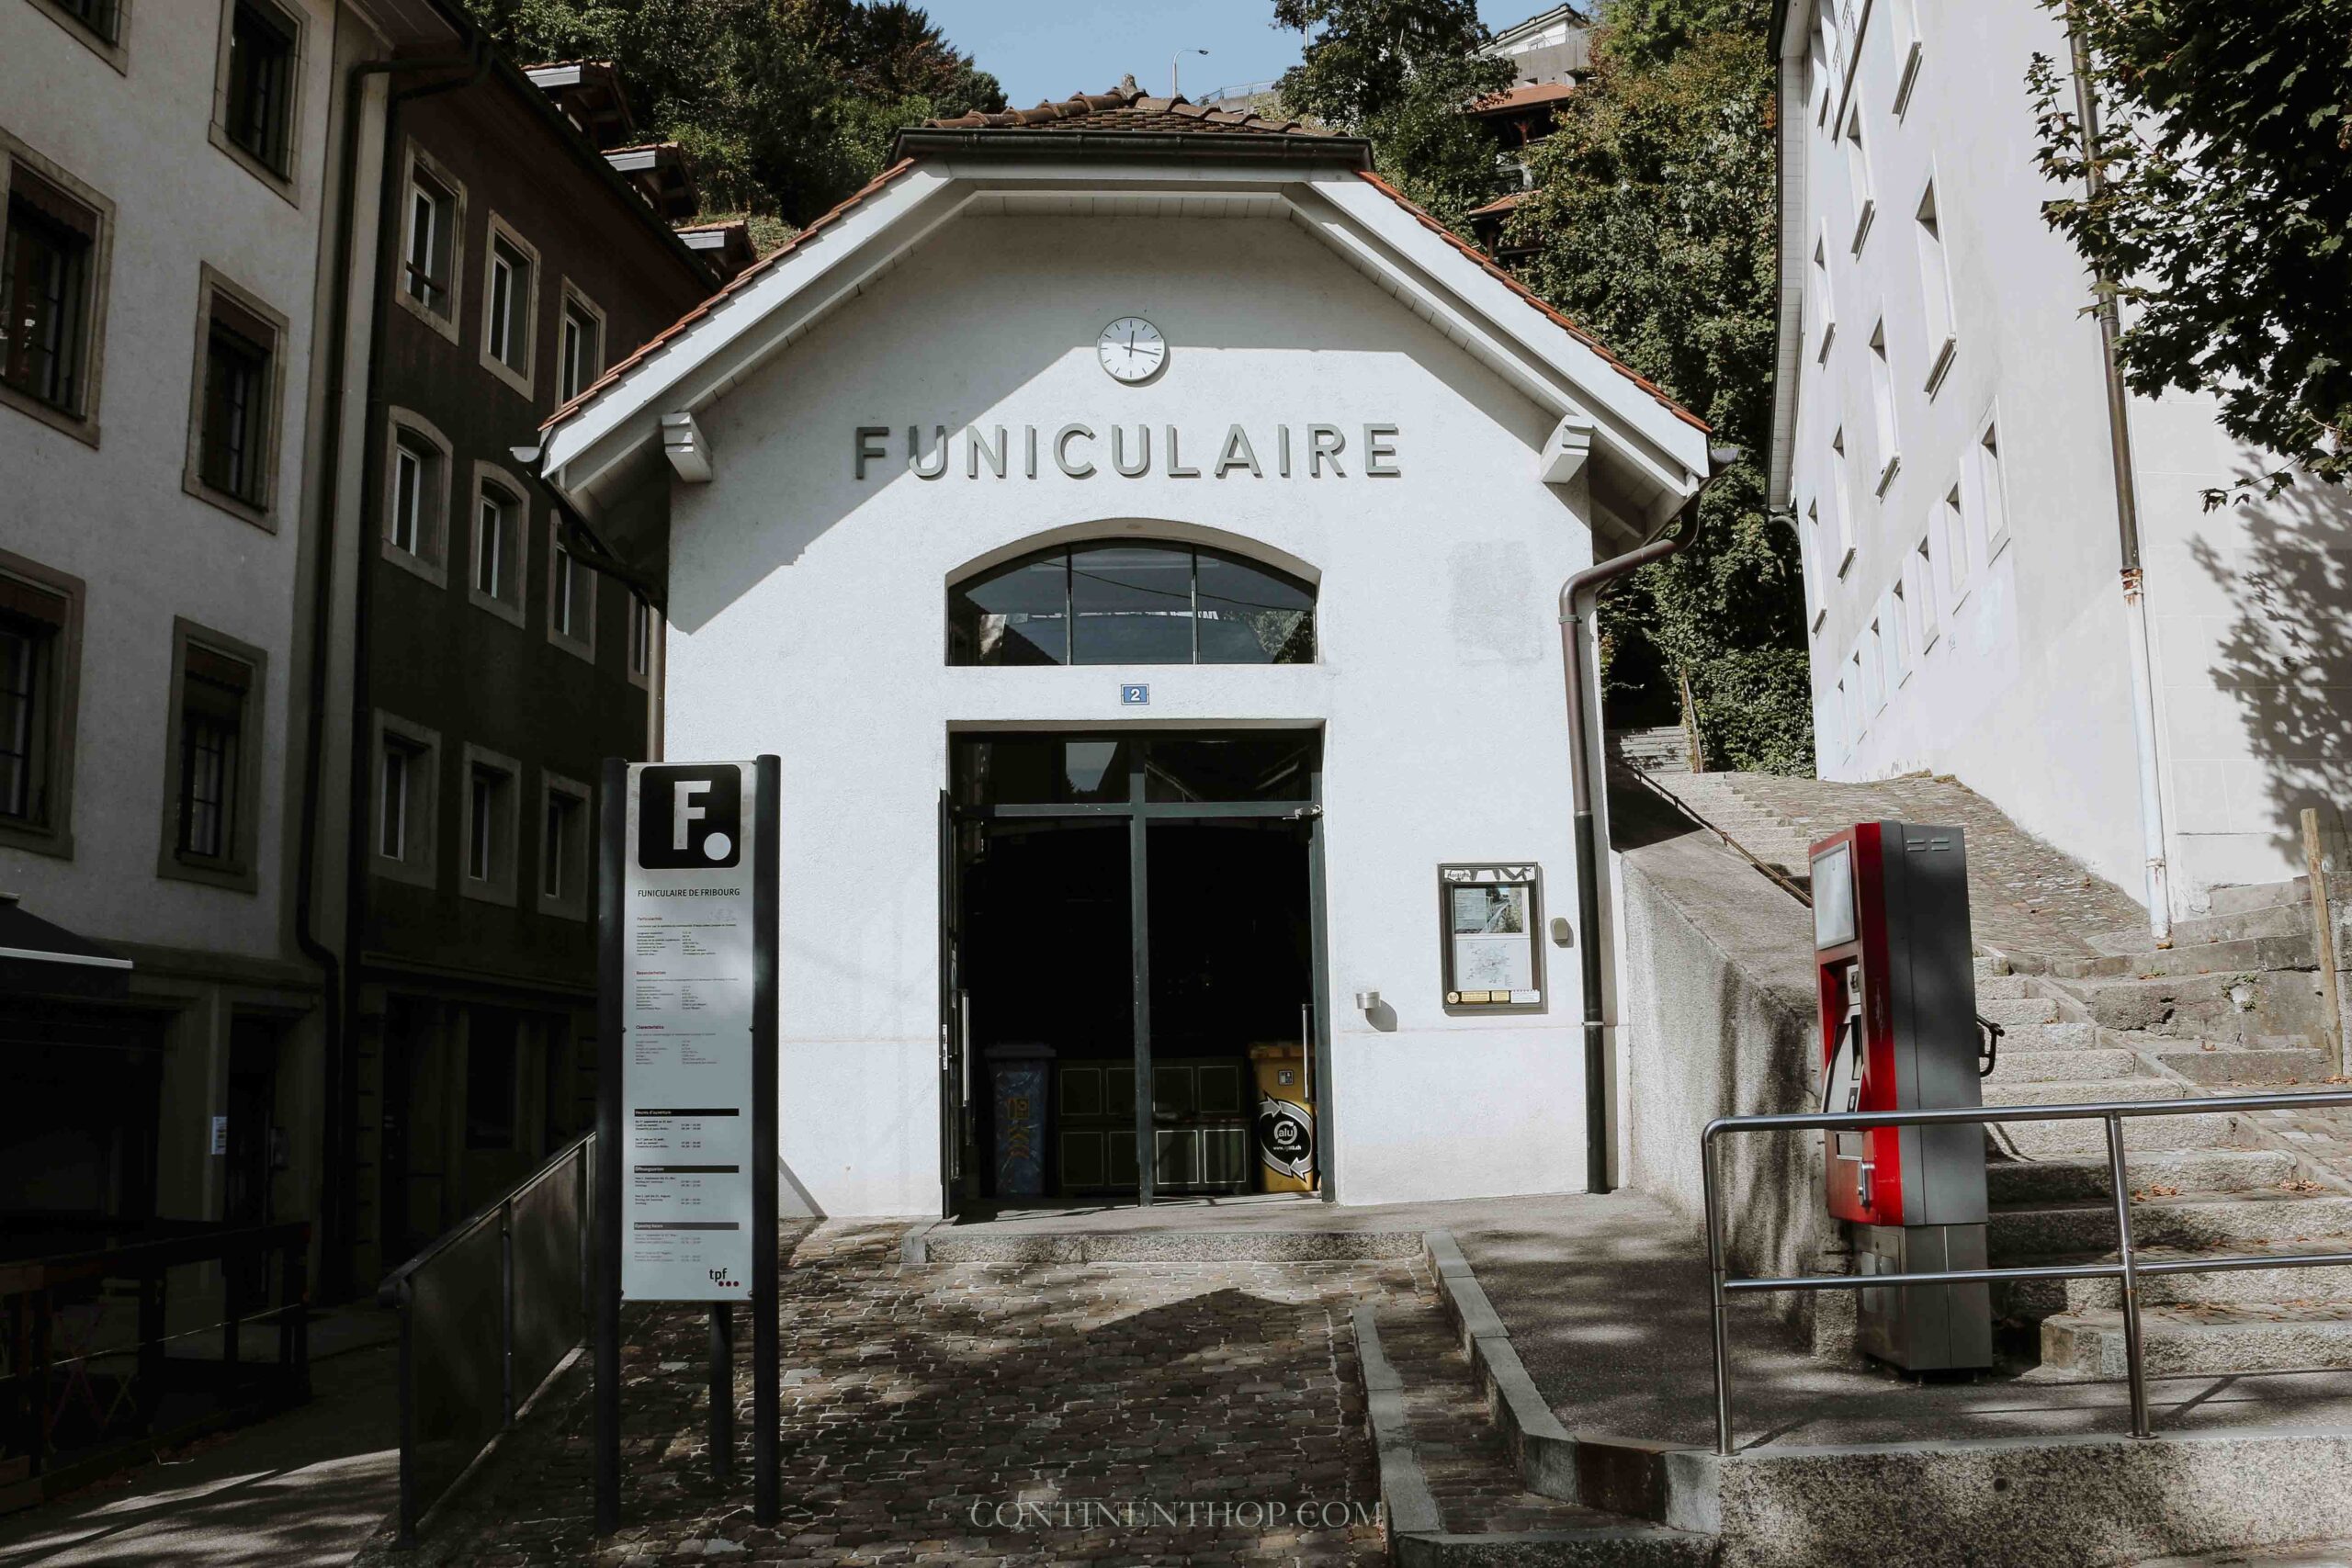 Entrance to the freiburg funicular included in the swiss travel pass